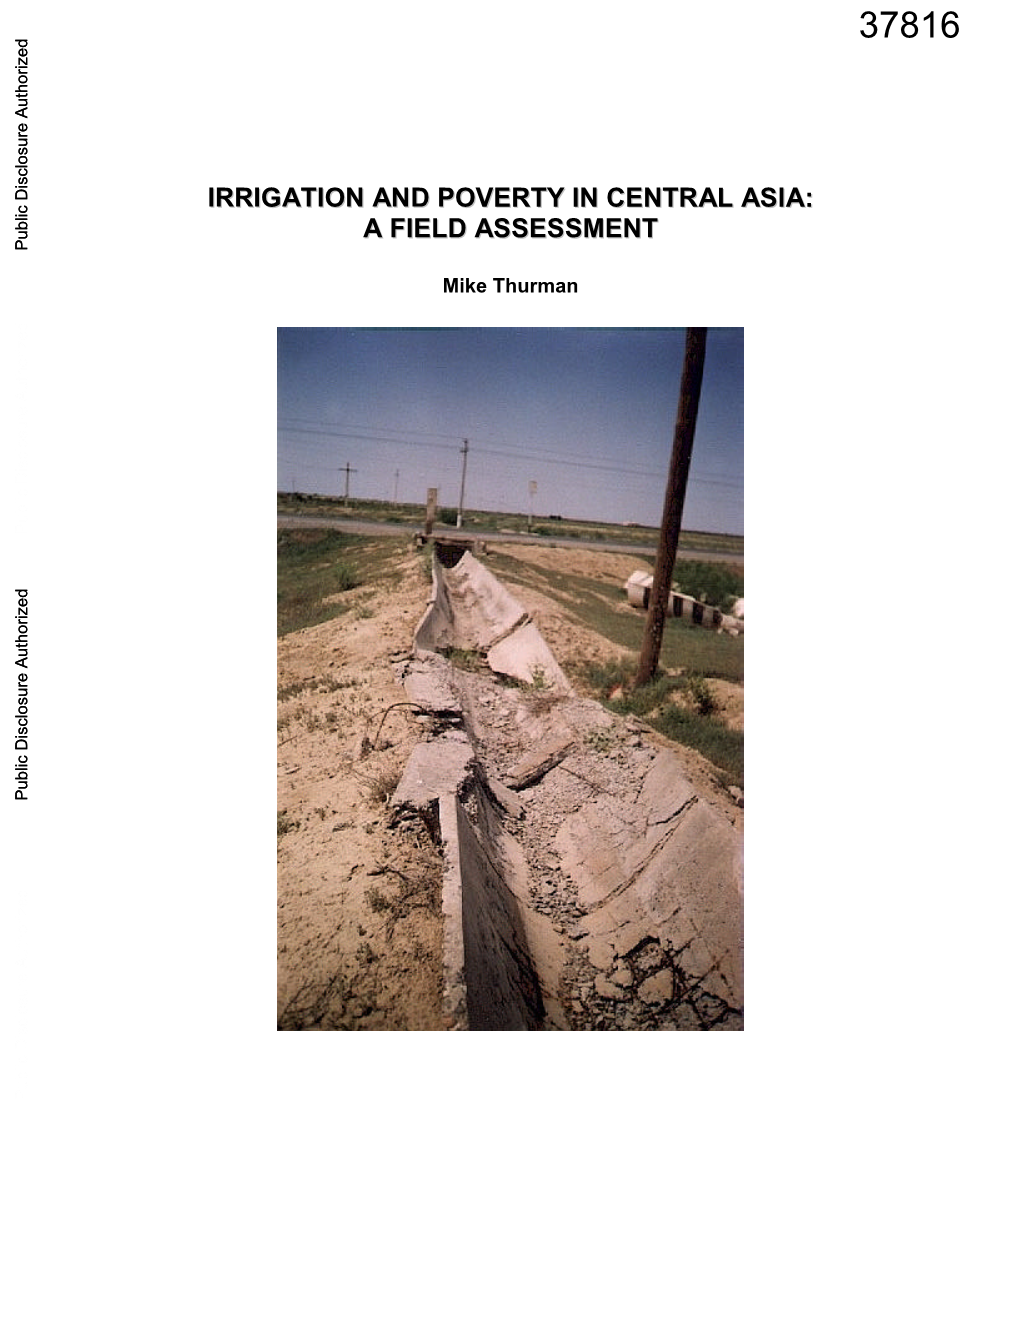 IRRIGATION and POVERTY in CENTRAL ASIA: a FIELD ASSESSMENT Public Disclosure Authorized Mike Thurman